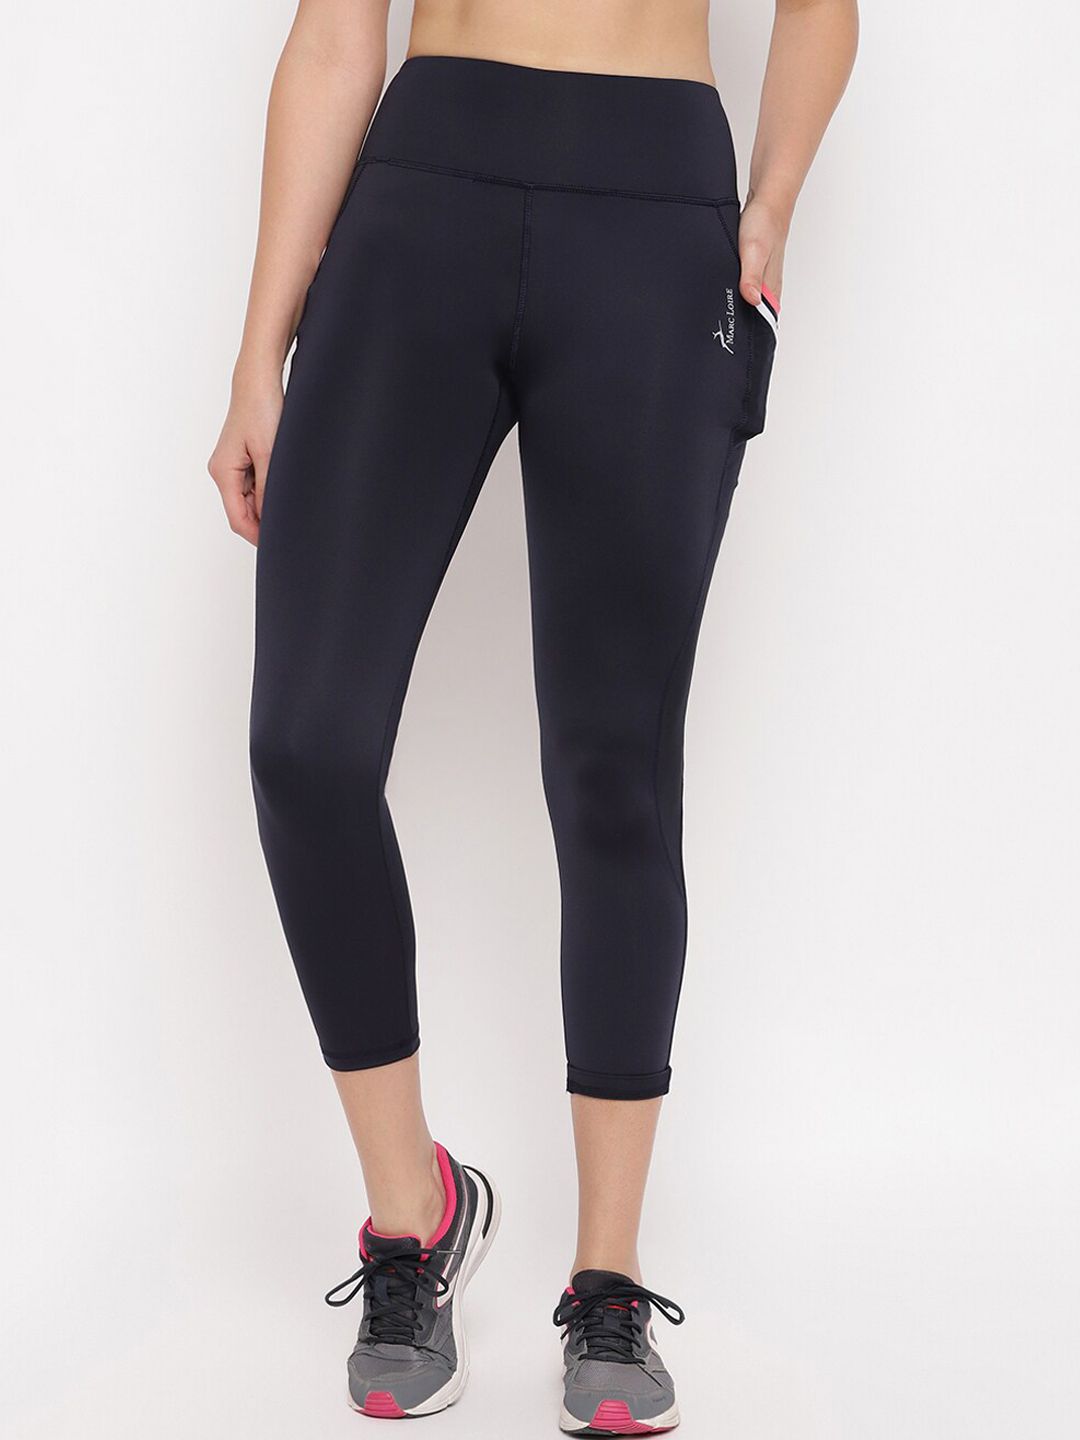 Marc Loire Women Black Solid Gym Tights Price in India